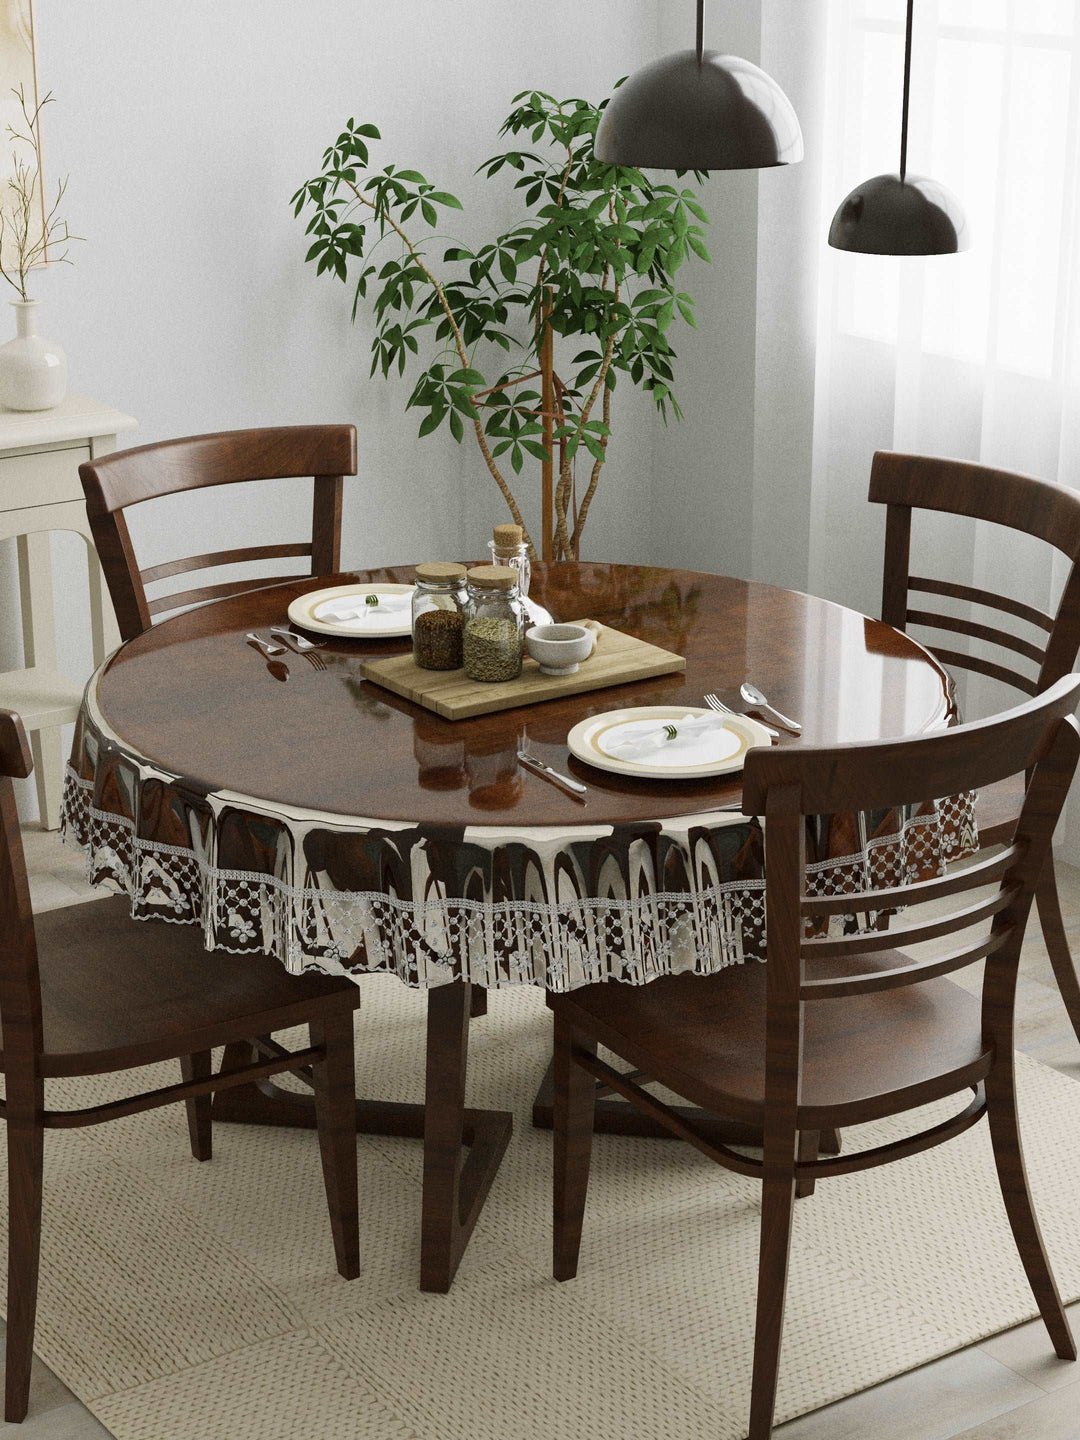 4 Seater Dining Table Cover; 60x60 Inches; Material - PVC; Anti Slip; Silver Lace